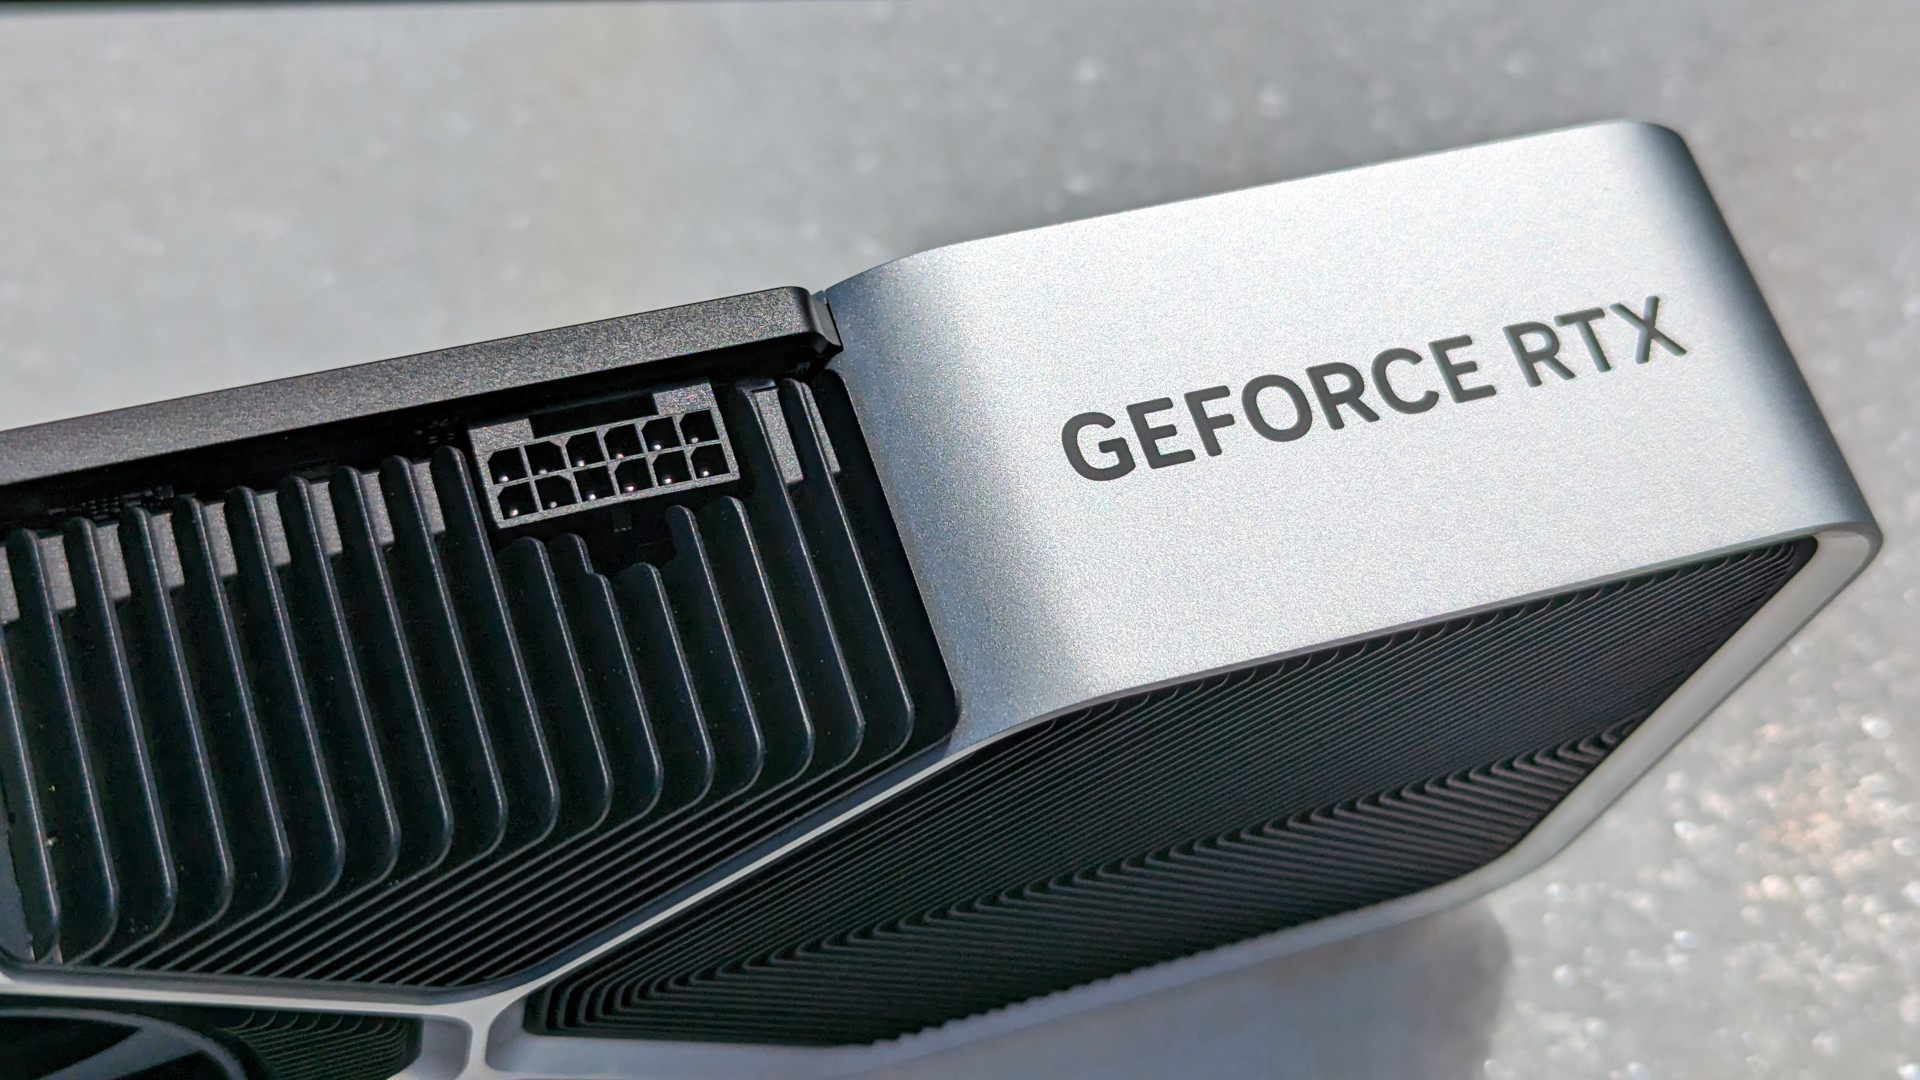 Nvidia GeForce RTX 4060 Ti 8GB review: The side of the graphics card, in which its power connector (center) and logo can be seen (right)